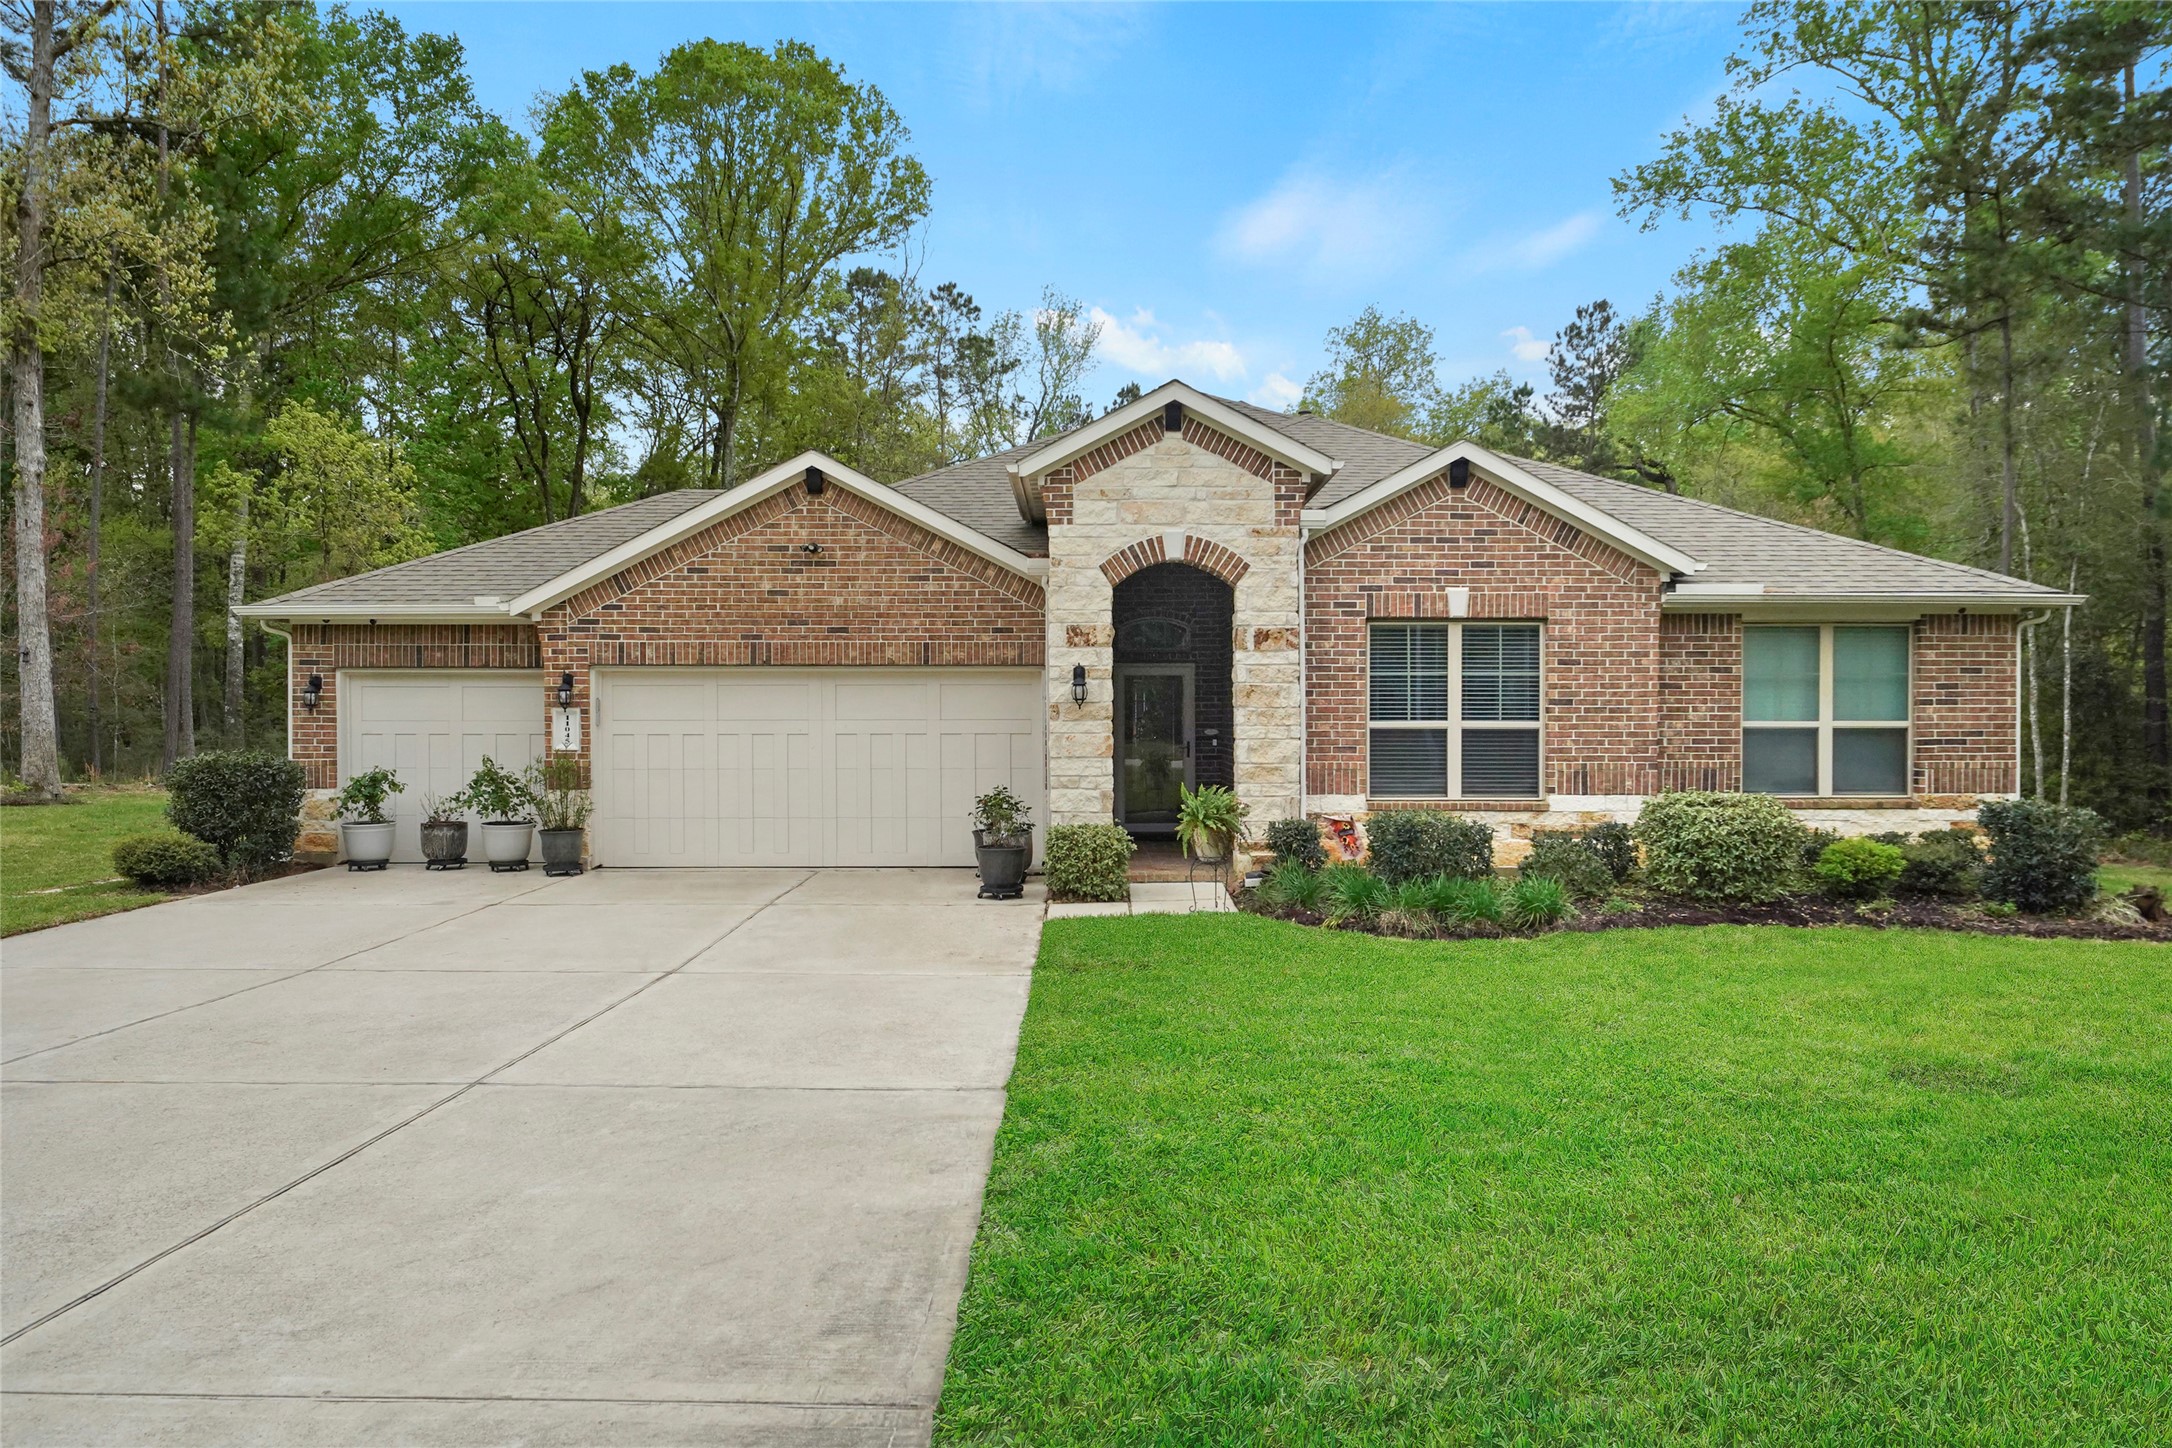 Welcome to 11045 Shadow View Drive located in Conroe's community of Shadow Lake Forest.